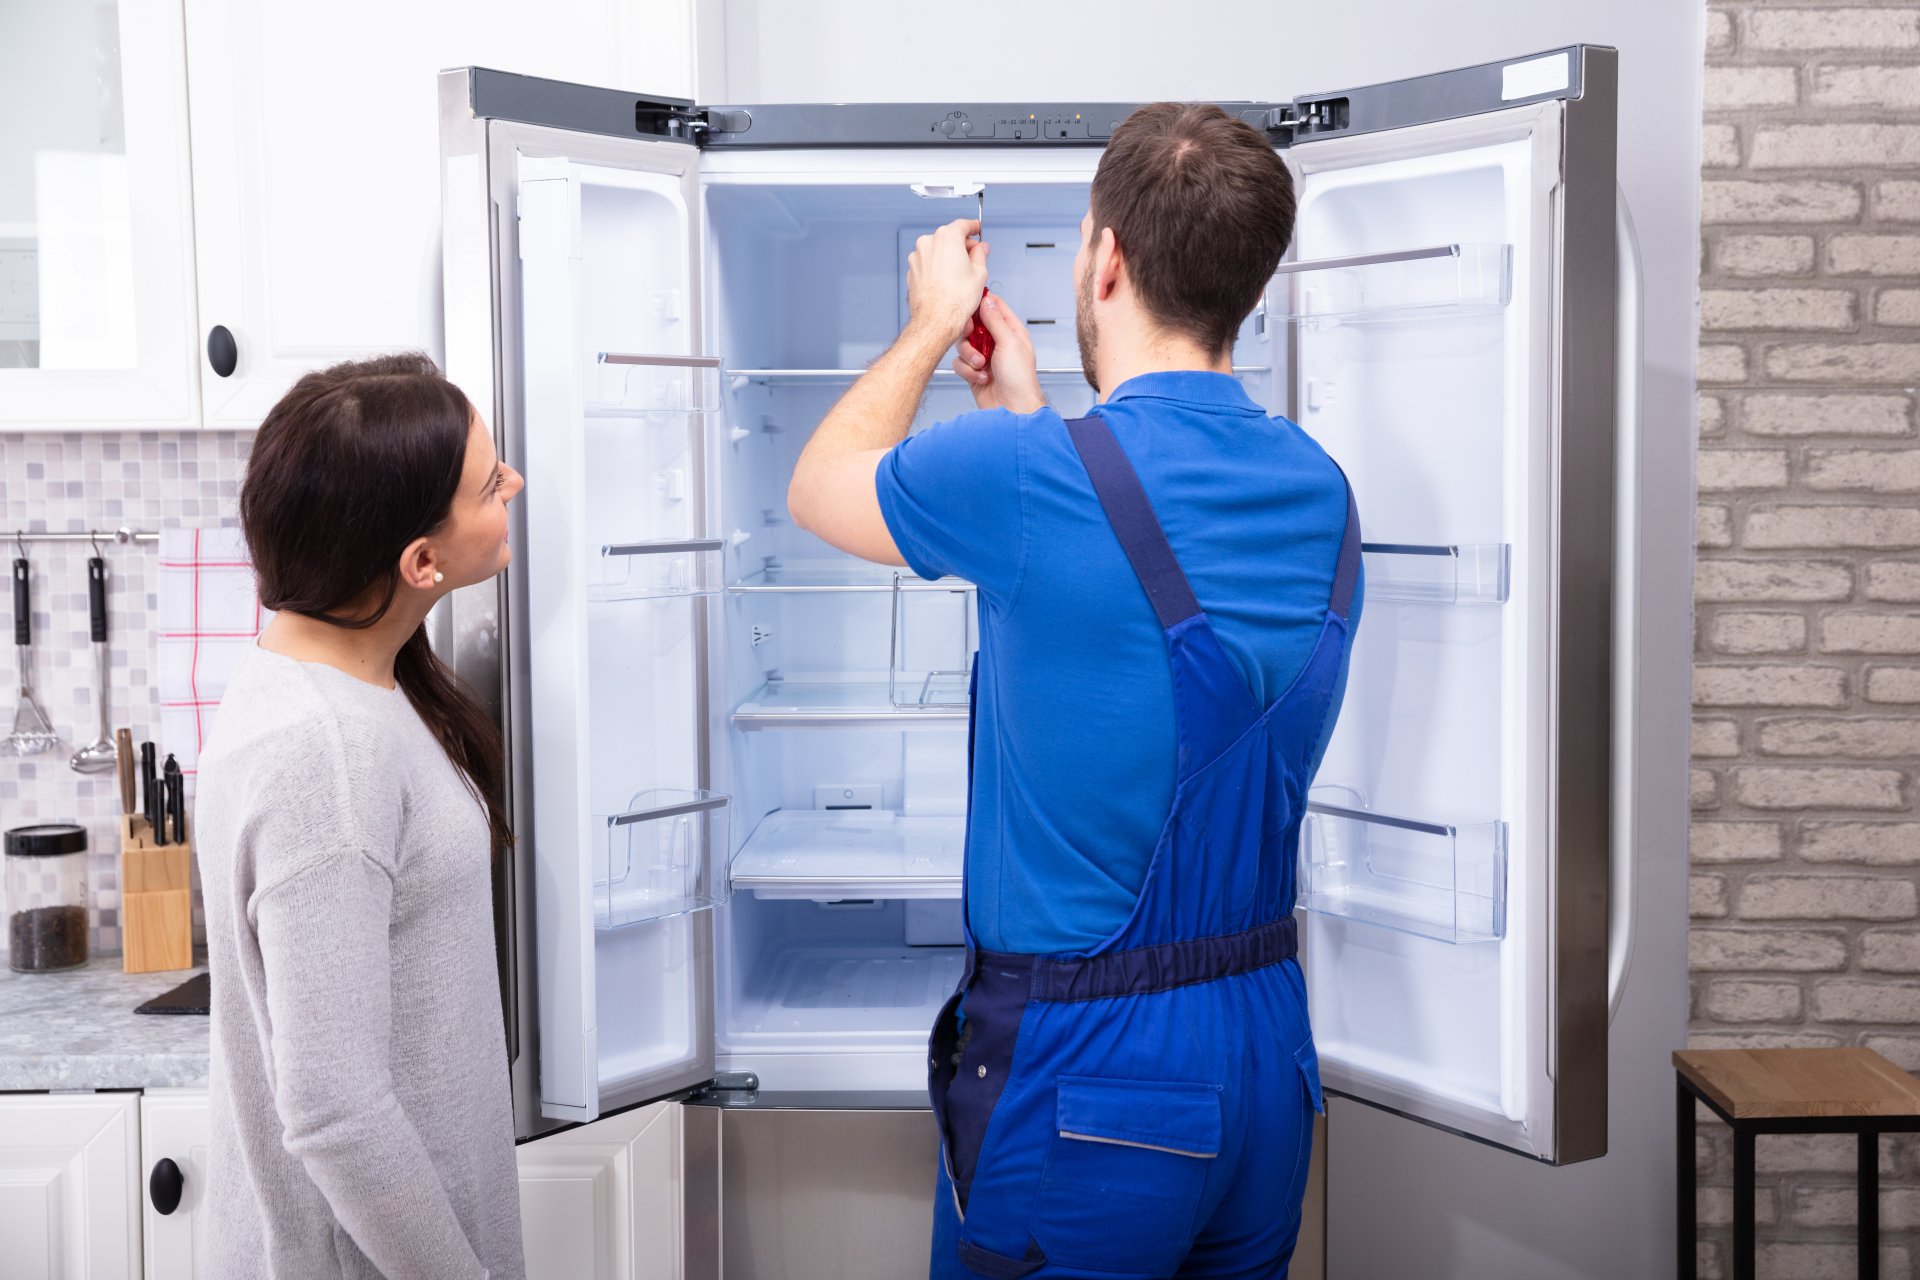 What is the cause of the refrigerator leaking?